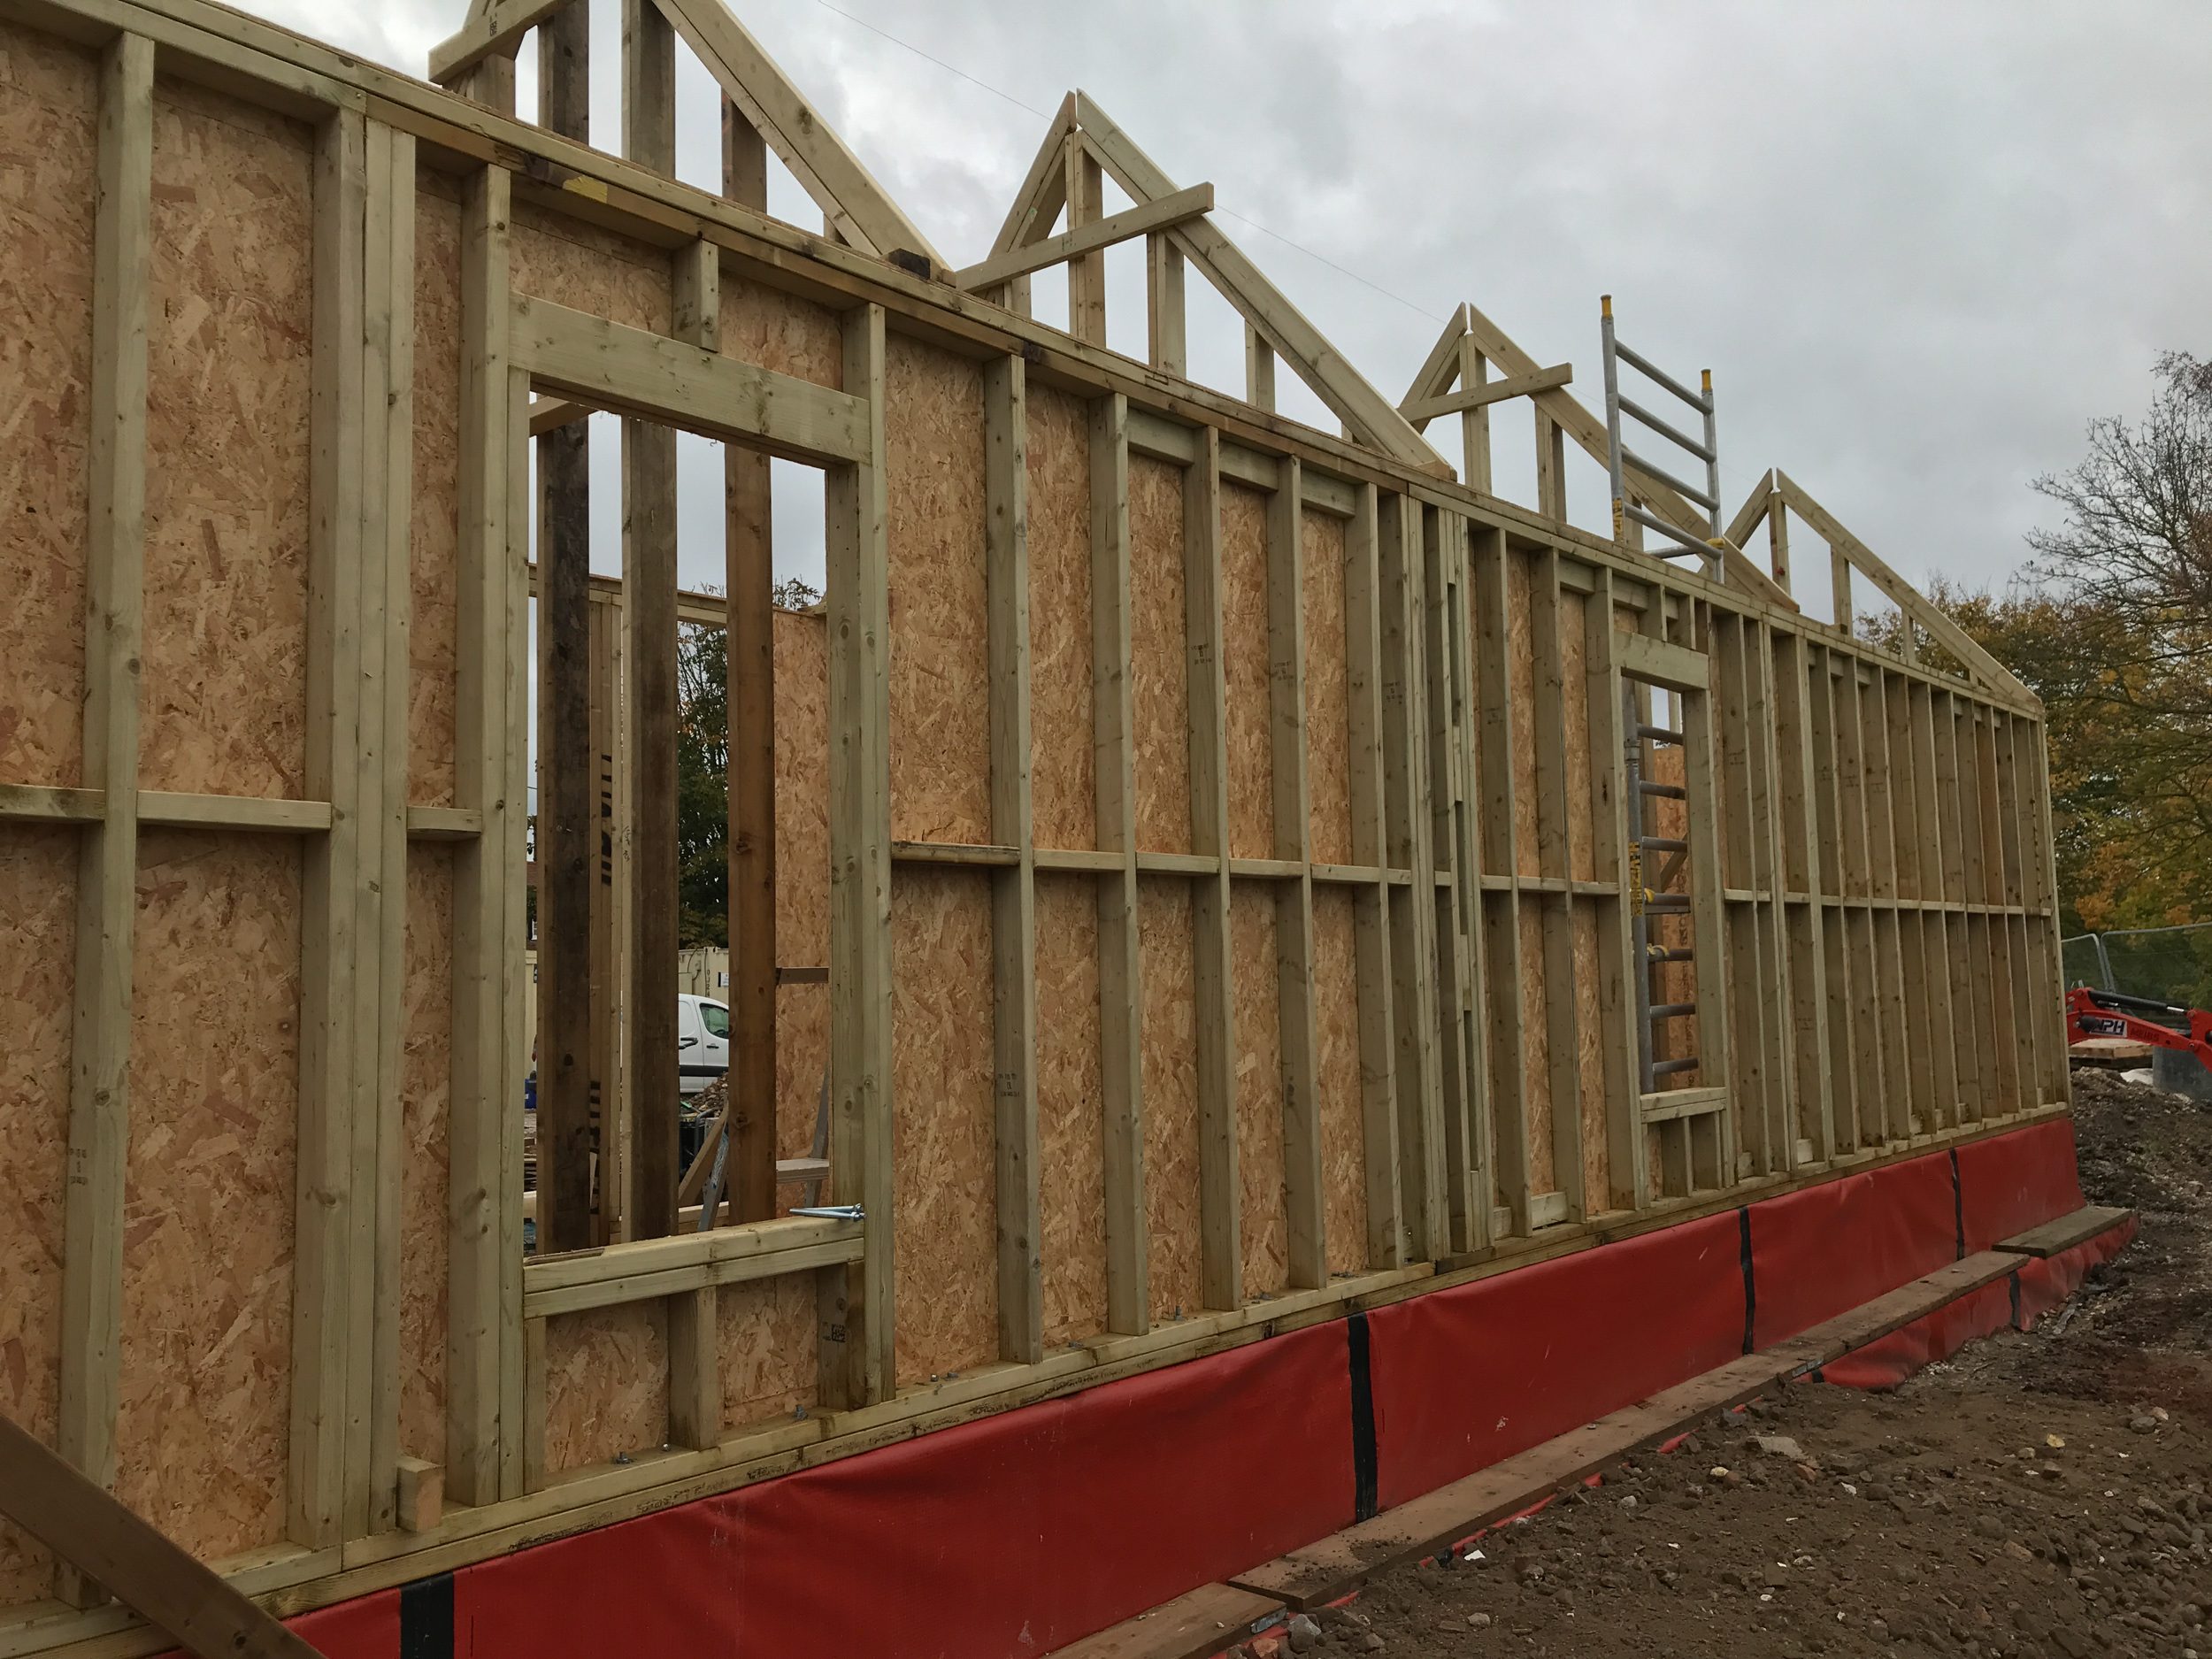 Construction of timber frame walls of house | cdc studio cambridge architects